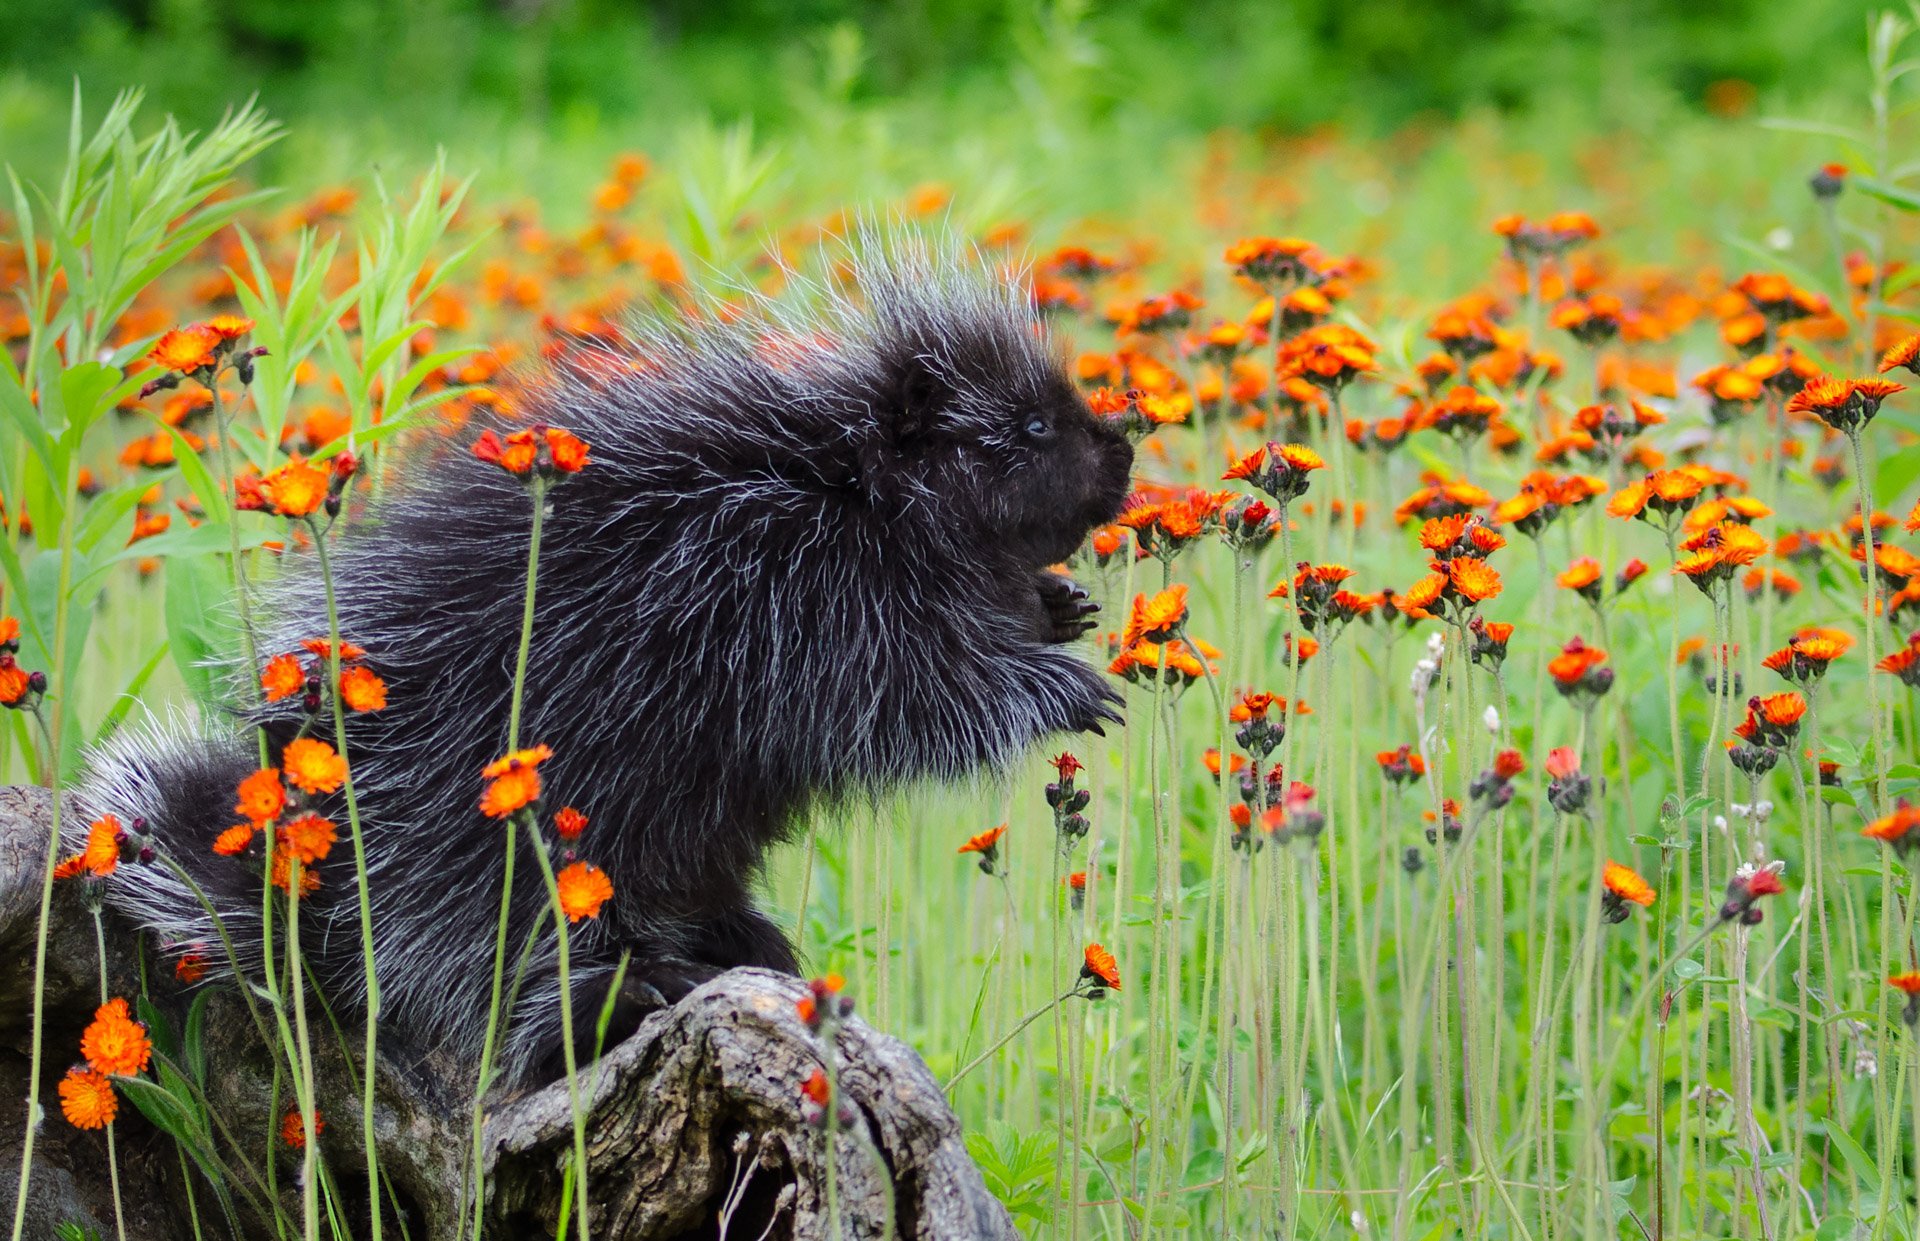 1st - Porcupine in the Flowers